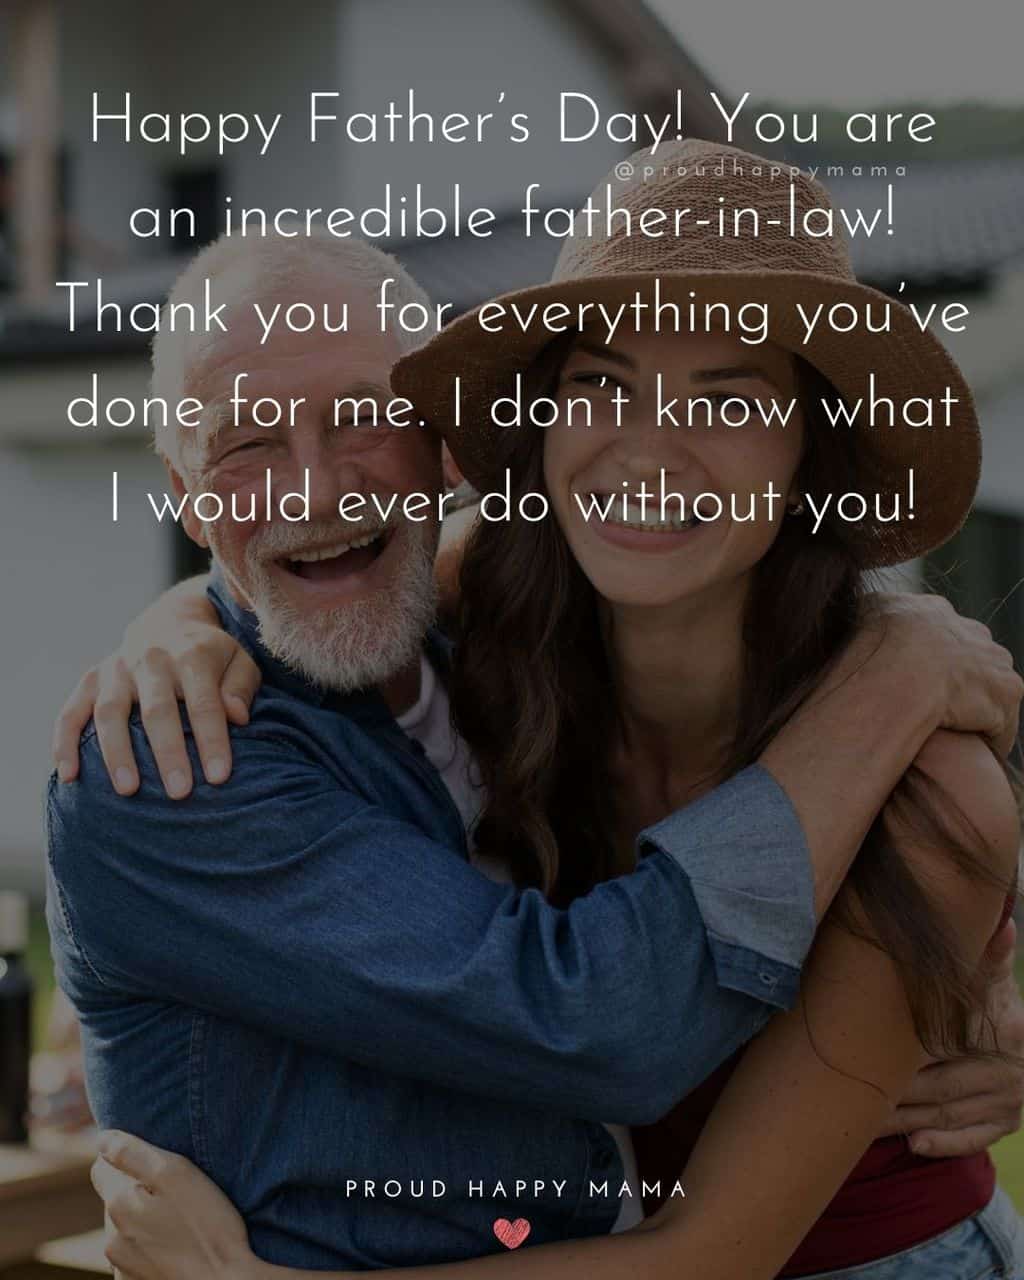 Happy Fathers Day Quotes For Father In Law - Happy Father’s Day! You are an incredible father in law! Thank you for